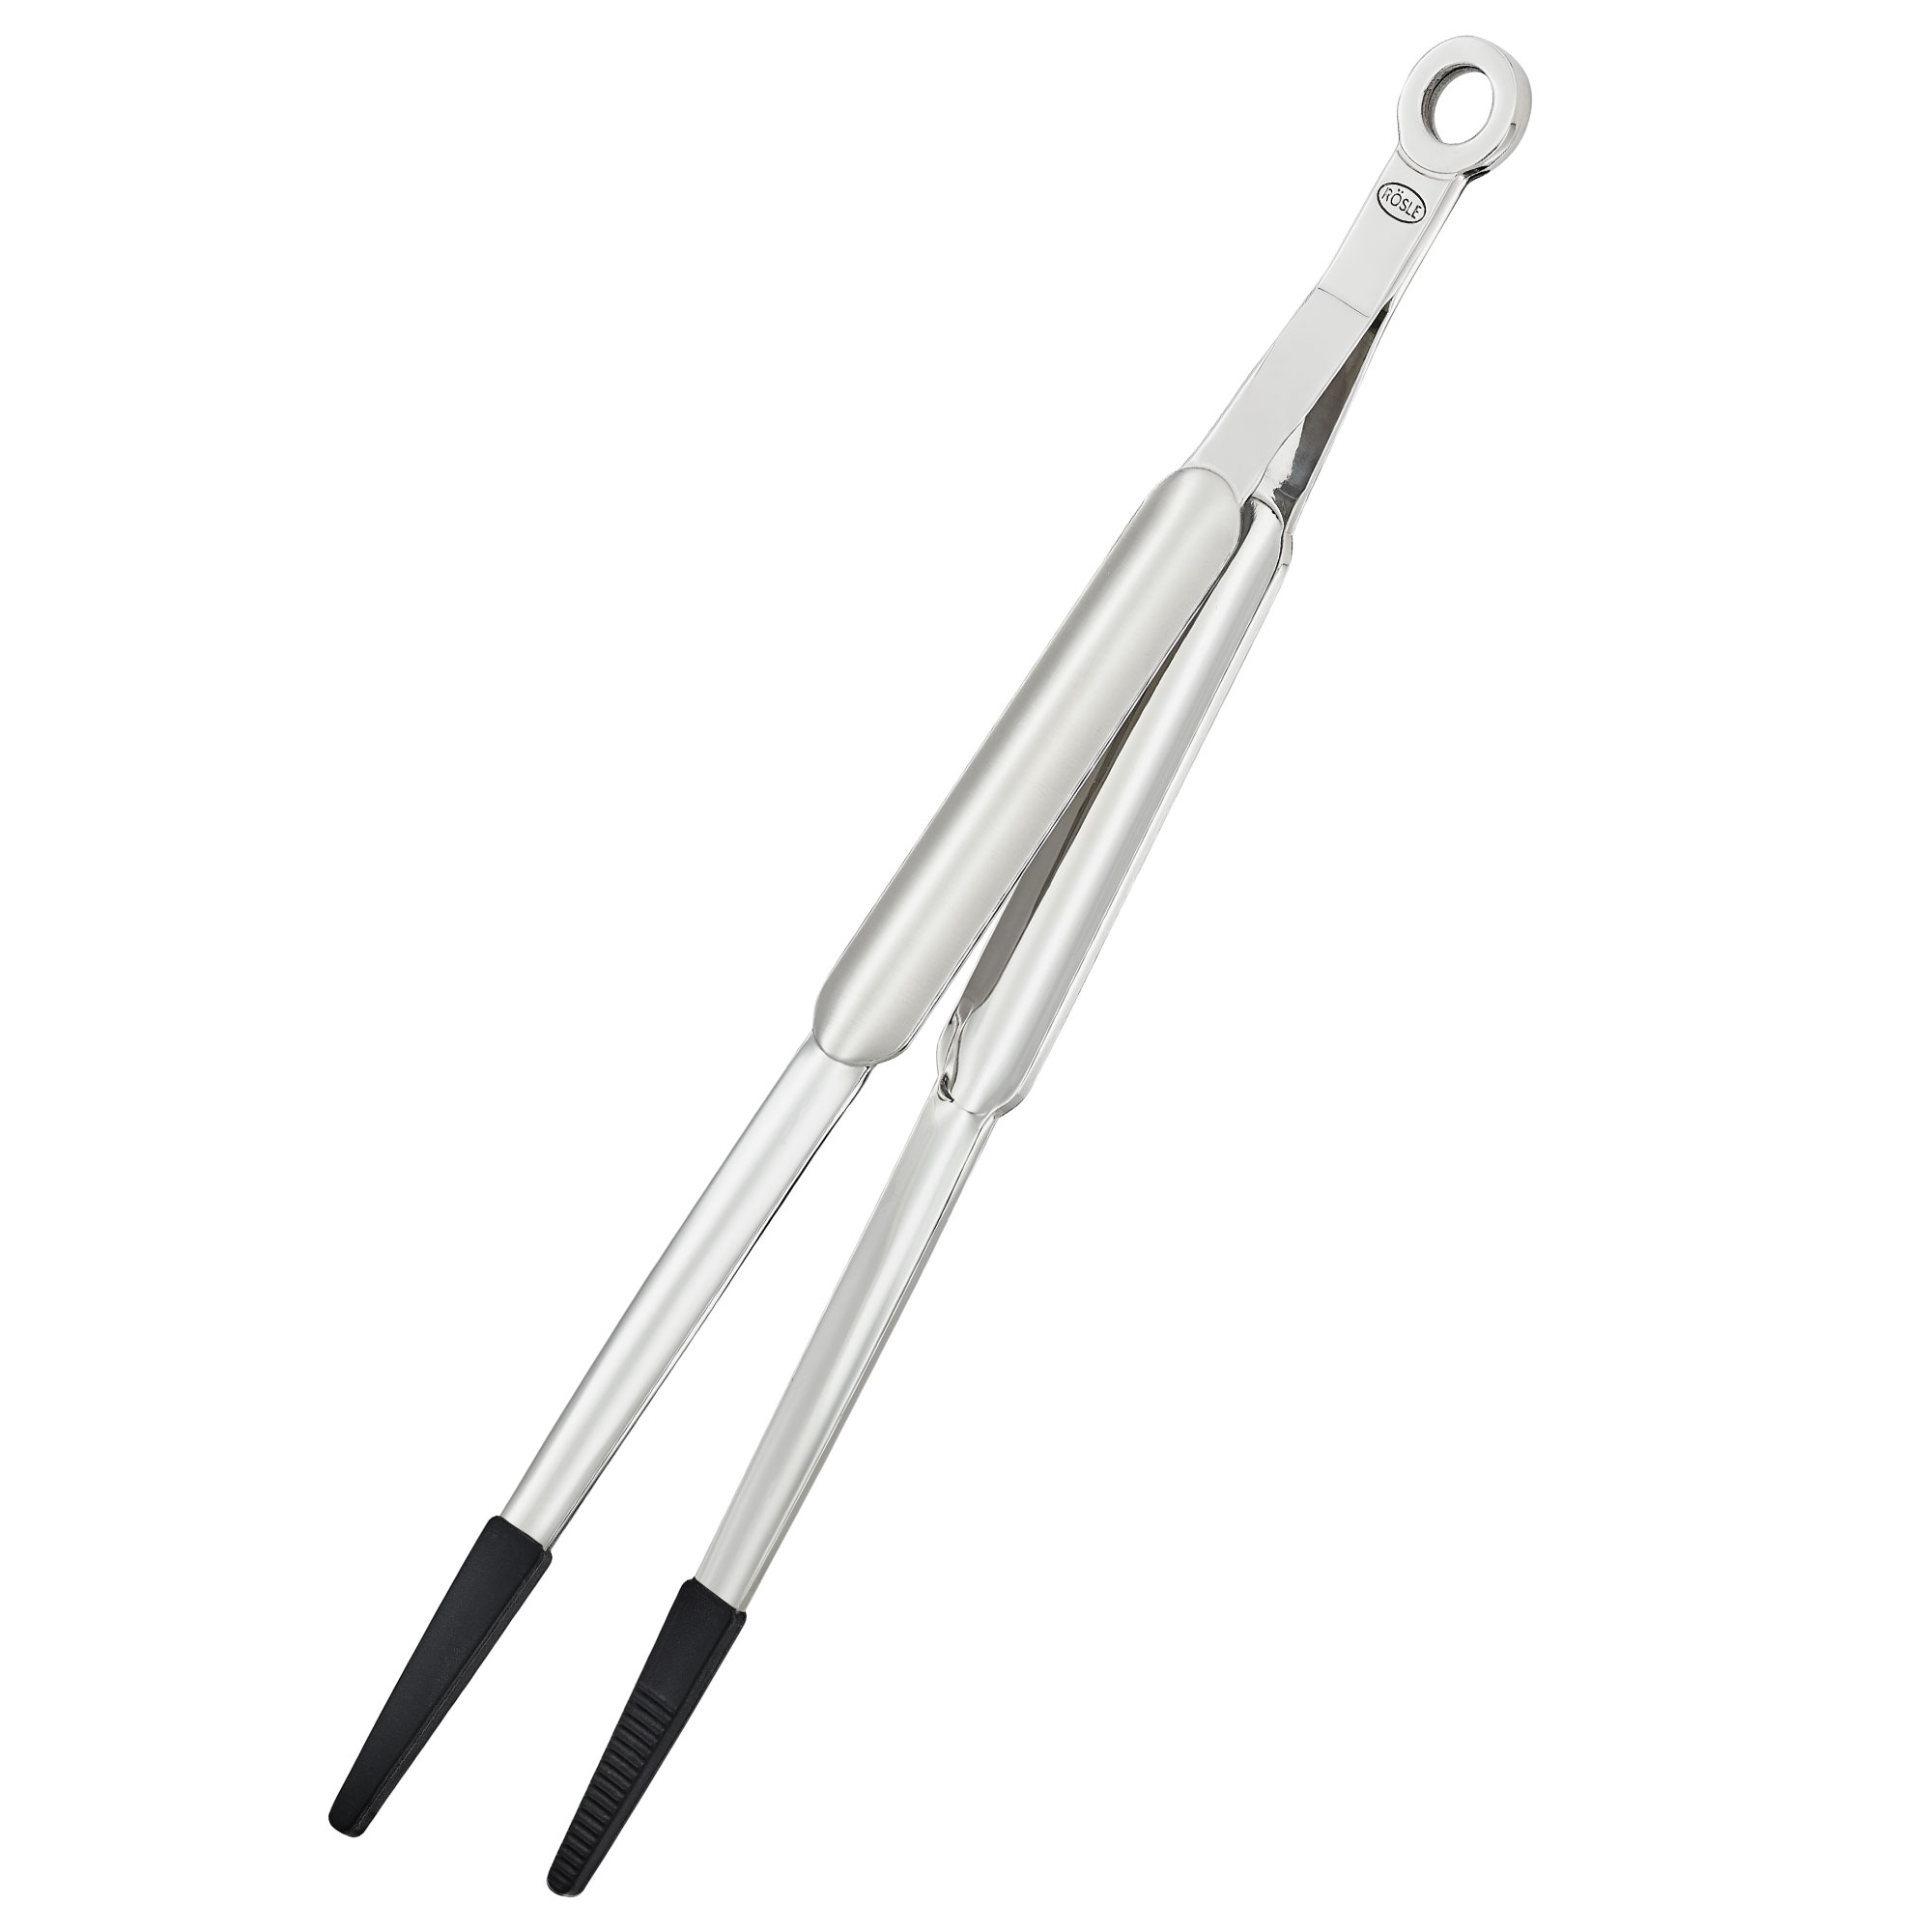 Buy Fine Tongs silicone - online at RÖSLE GmbH & Co. KG